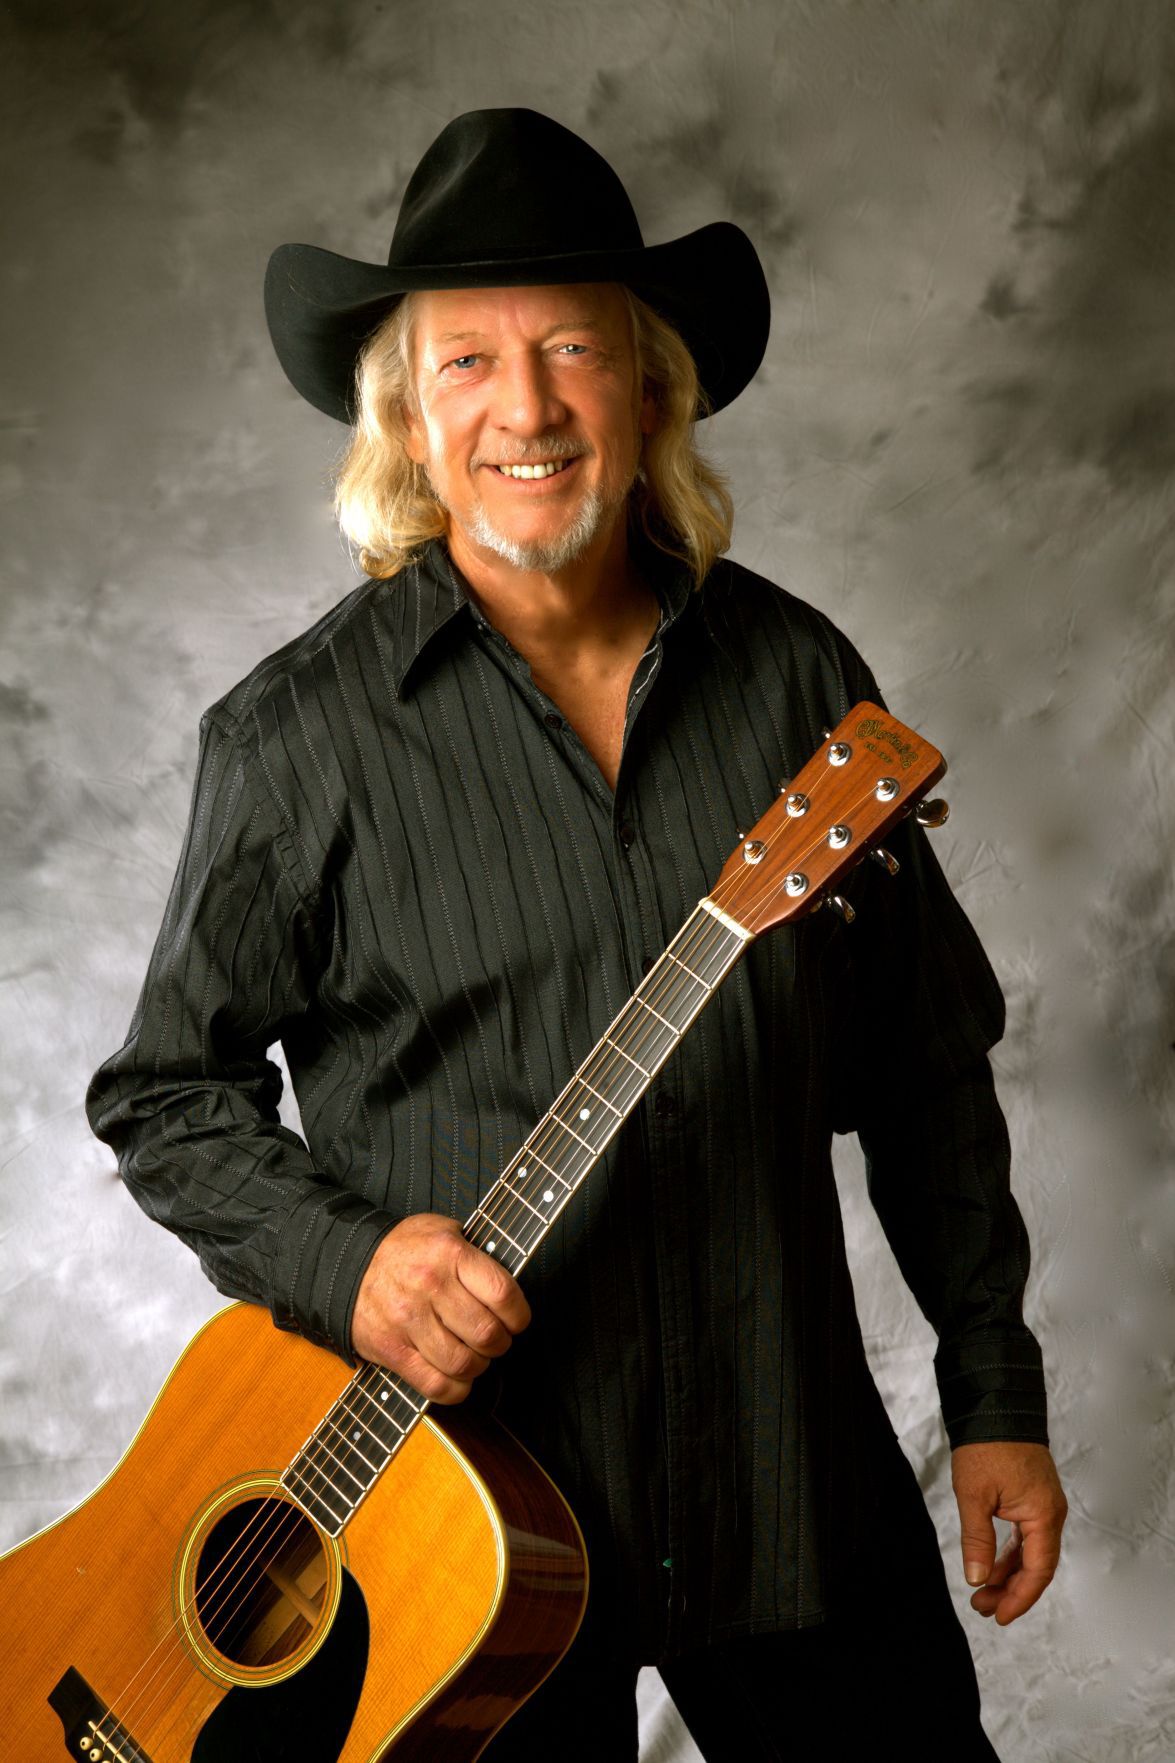 Tanya Tucker and John Anderson to perform at Orpheum | Music | siouxcityjournal.com